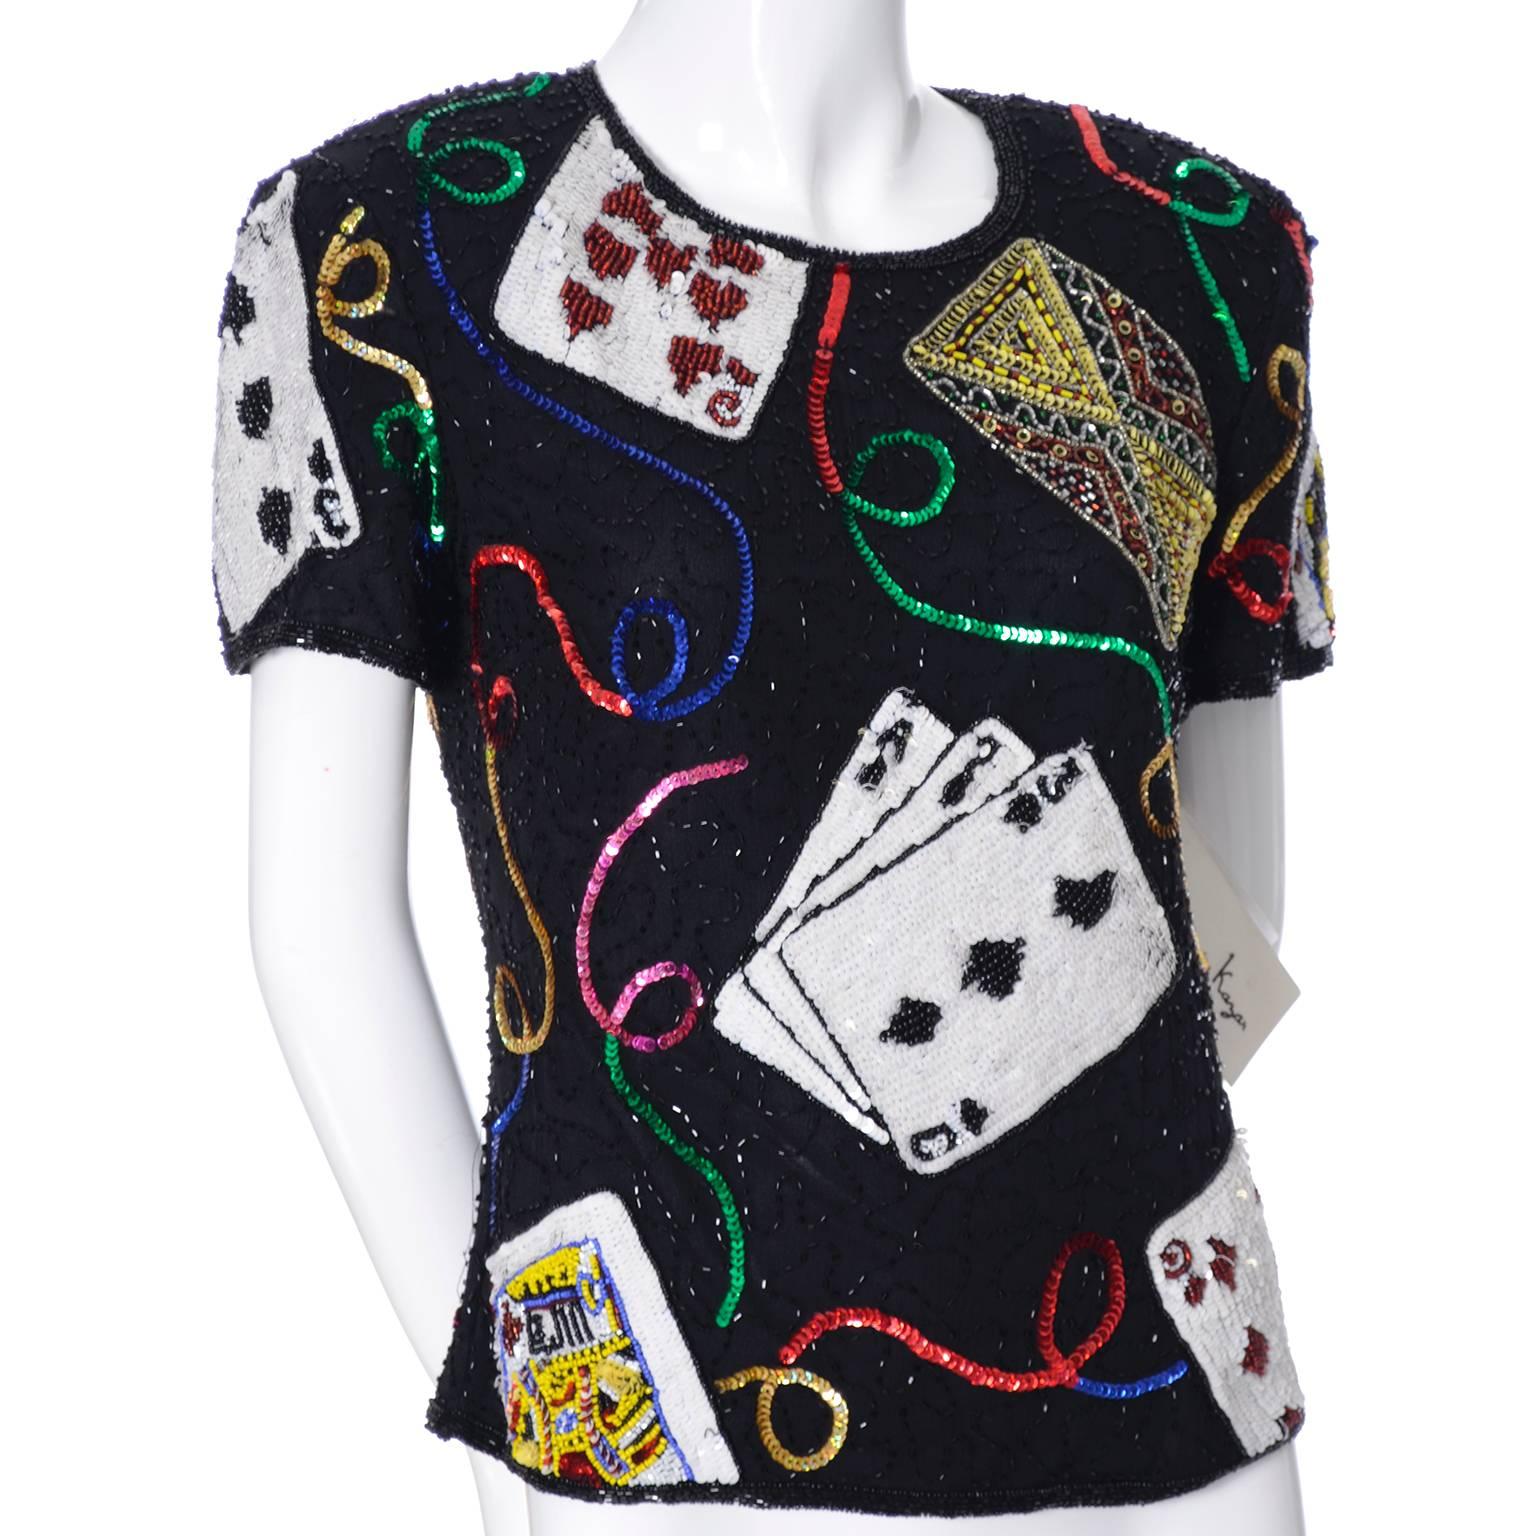 This is a deadstock novelty vintage top from Laurence Kazar, covered in beads and sequins.  There are playing cards and ribbon curls, as well as other pretty embellishments.  This top is fully lined and has a back zipper and there are only a few